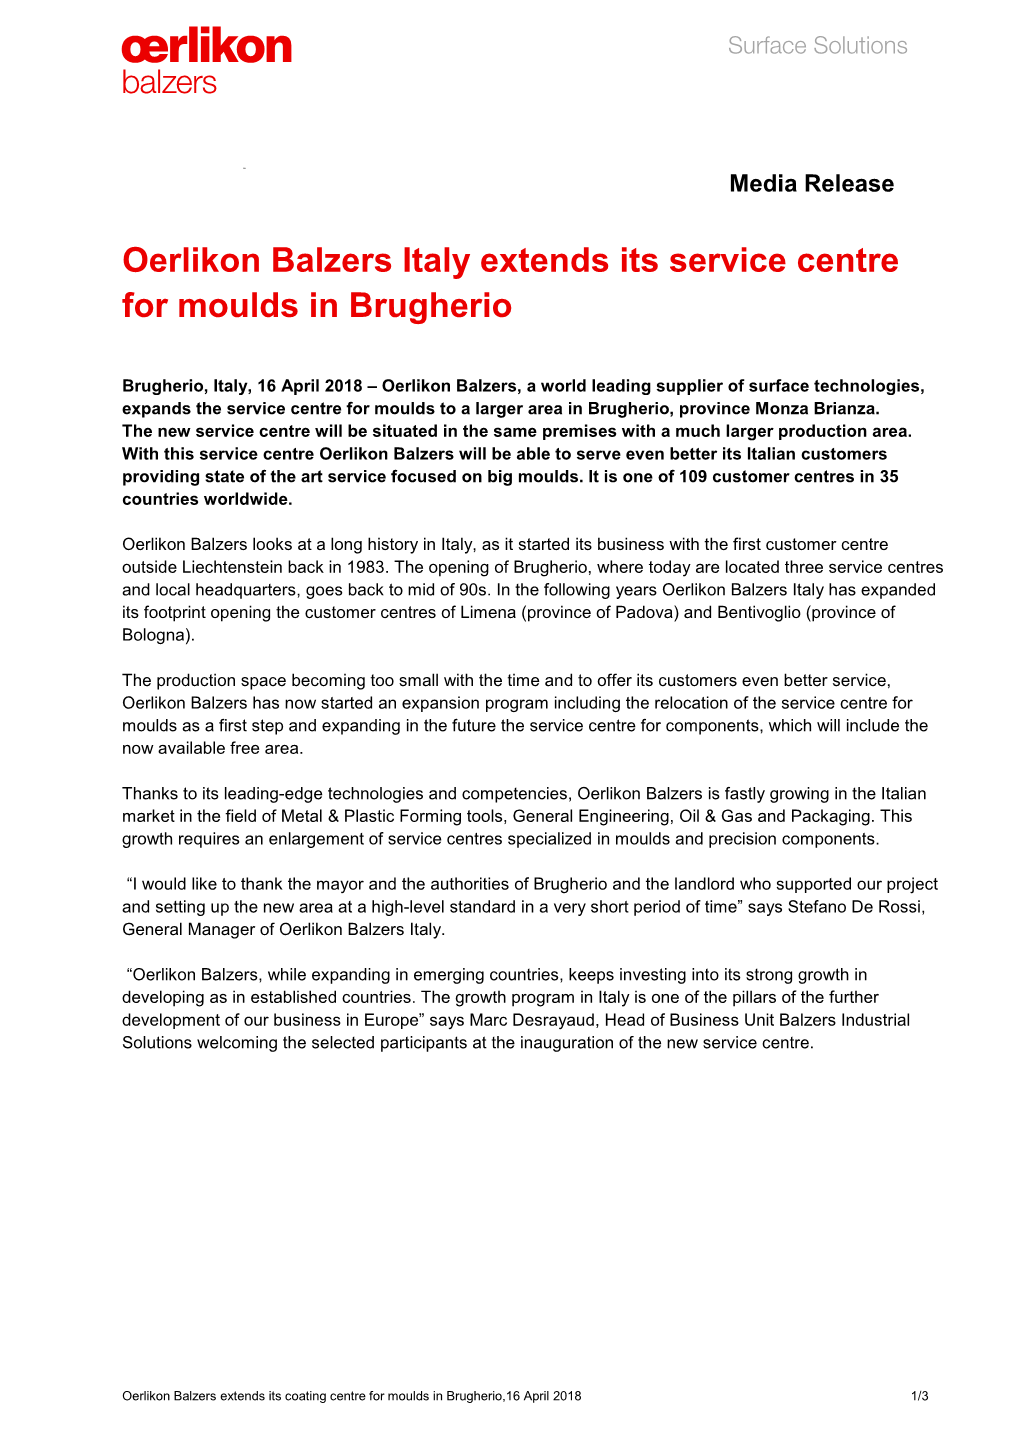 Oerlikon Balzers Italy Extends Its Service Centre for Moulds in Brugherio